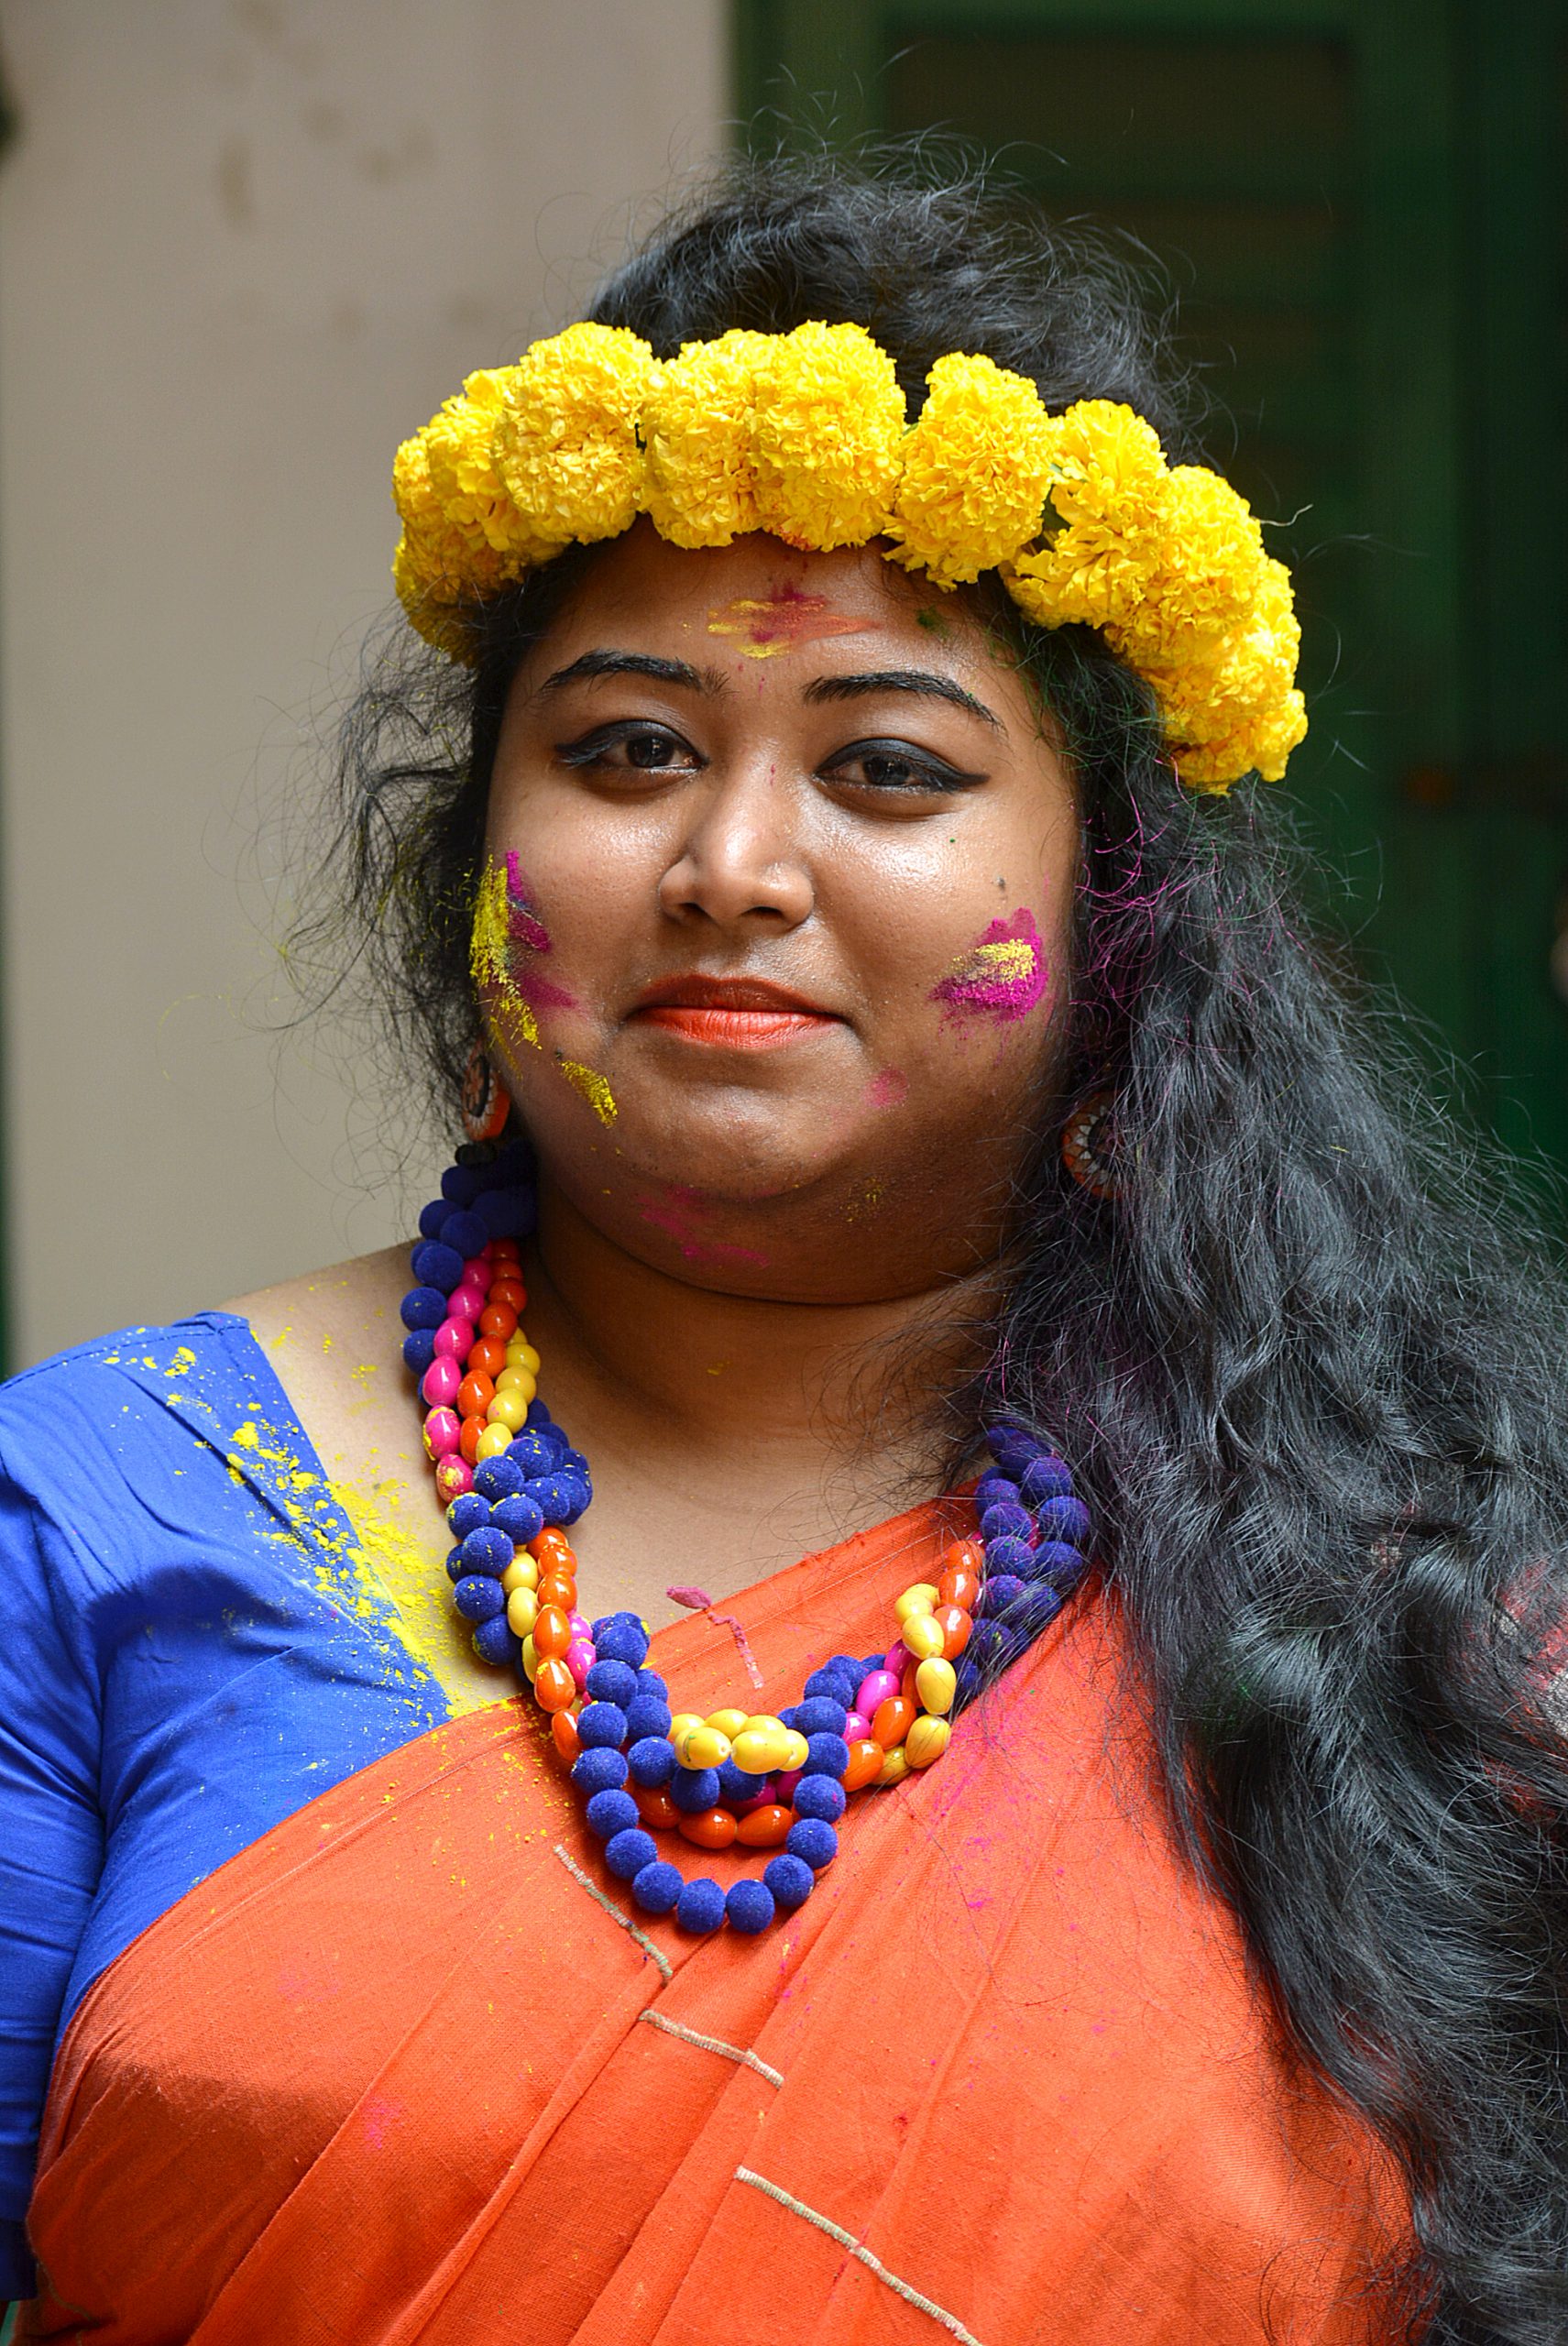 A woman during Holi festival